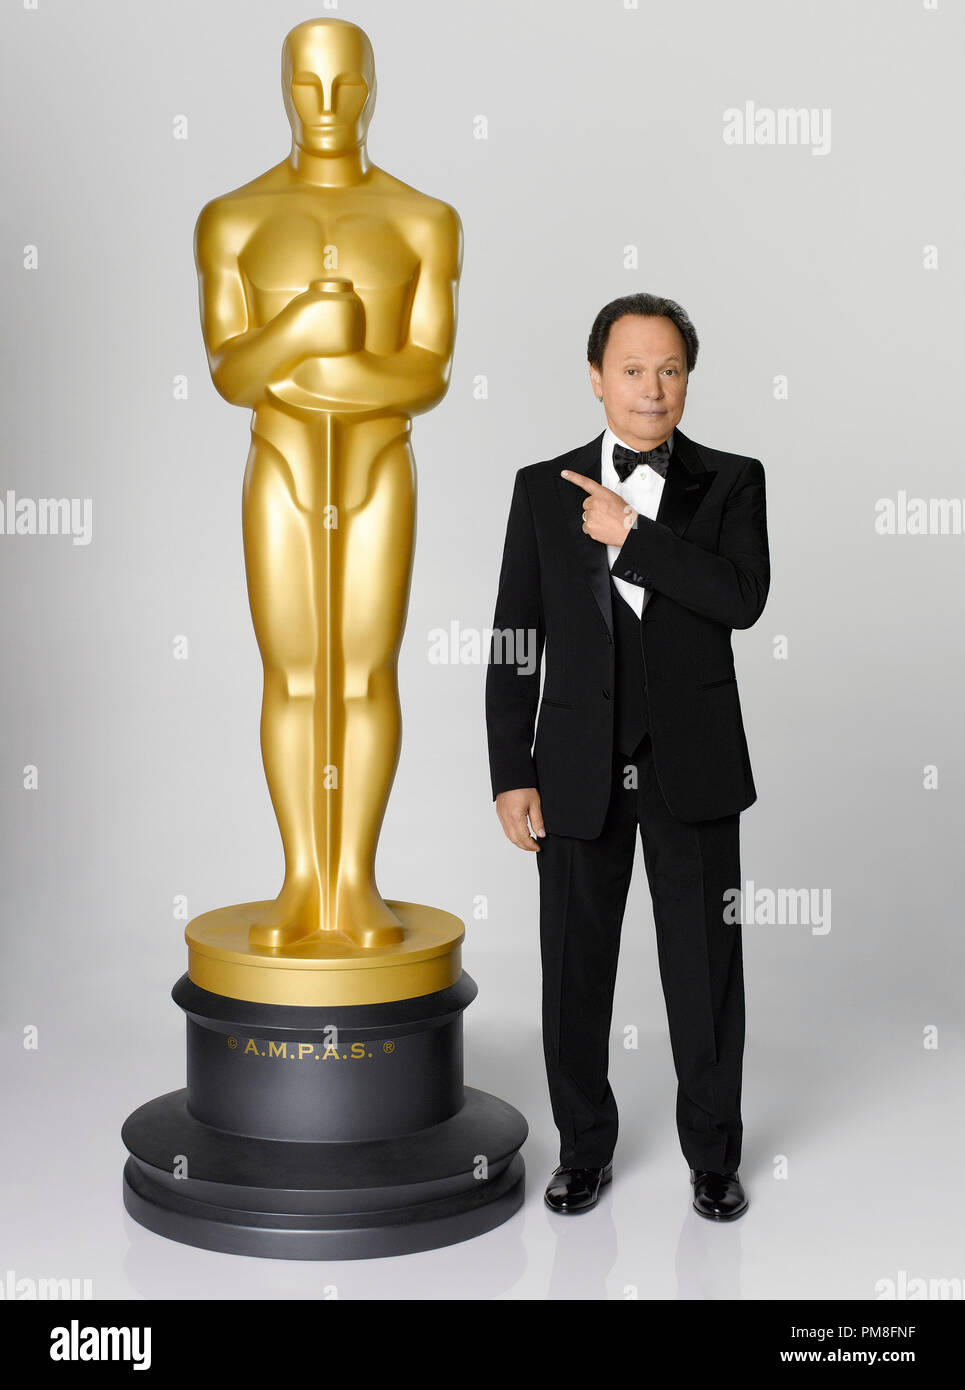 THE 84TH ACADEMY AWARDS¨ - Billy Crystal serves as host for the 84th Academy Awards, which will be presented on Sunday, February 26, 2012, at the Kodak Theatre at Hollywood & Highland Center¨, and televised live by the ABC Television Network. (ABC/BOB D'AMICO) Stock Photo